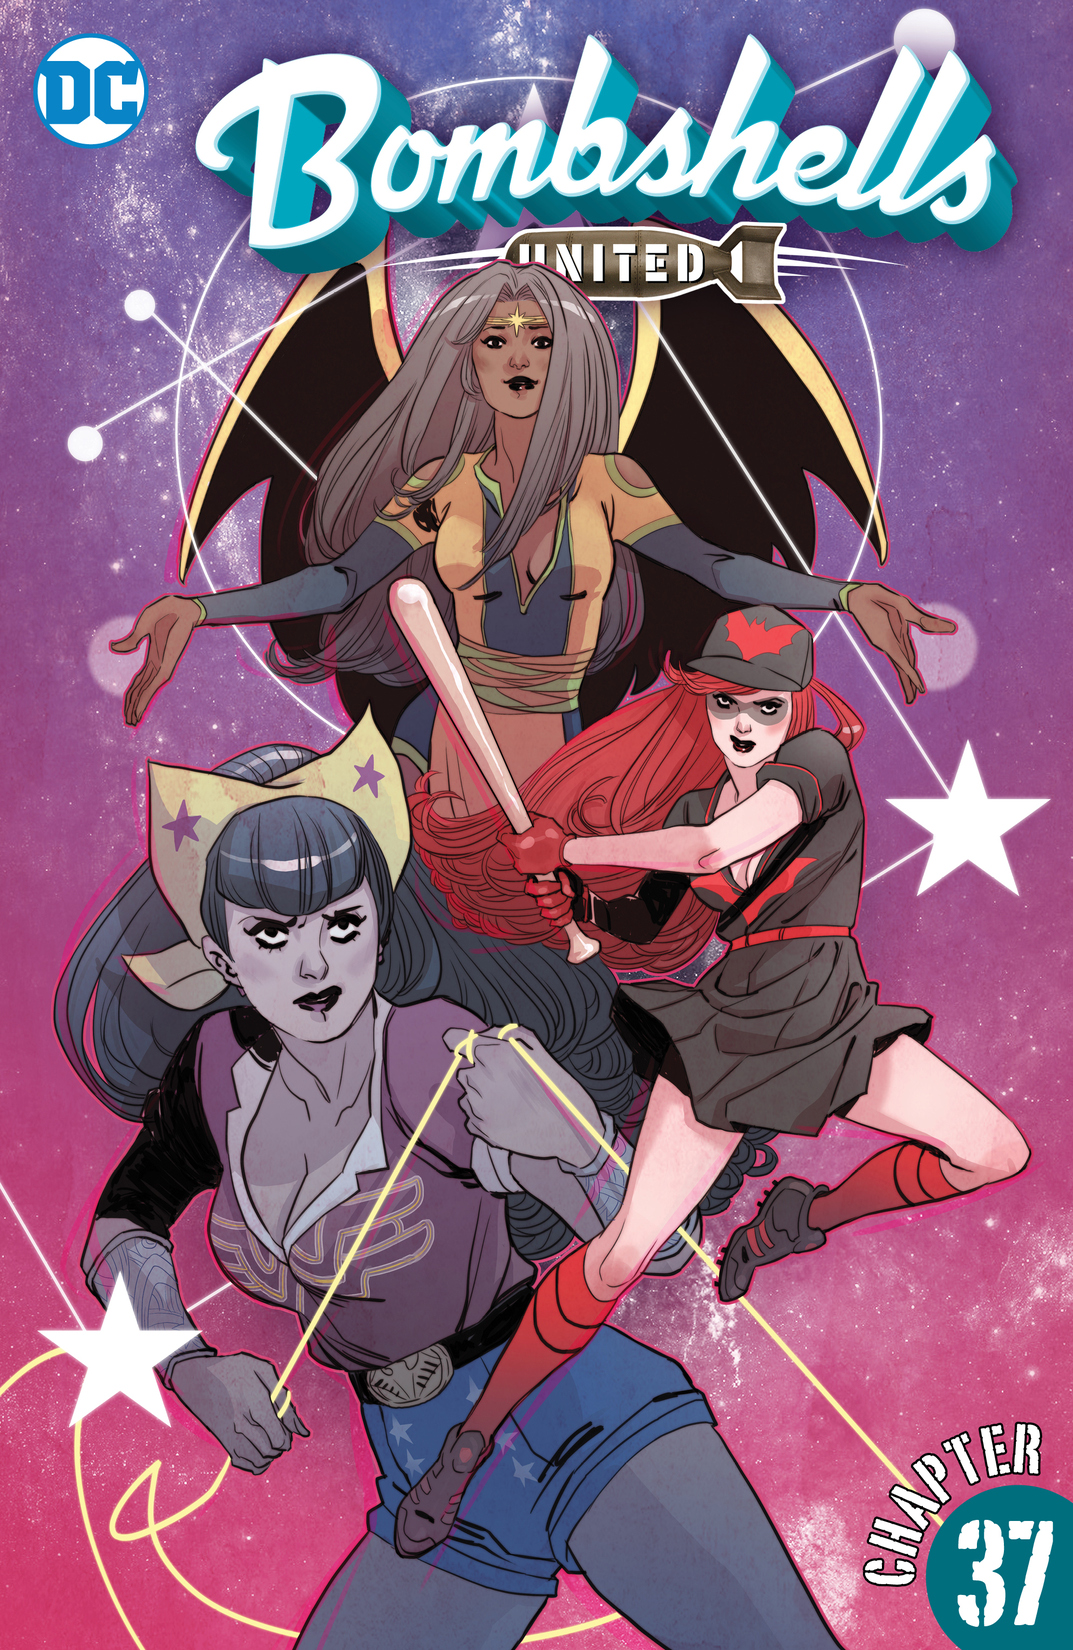 Bombshells: United #37 preview images